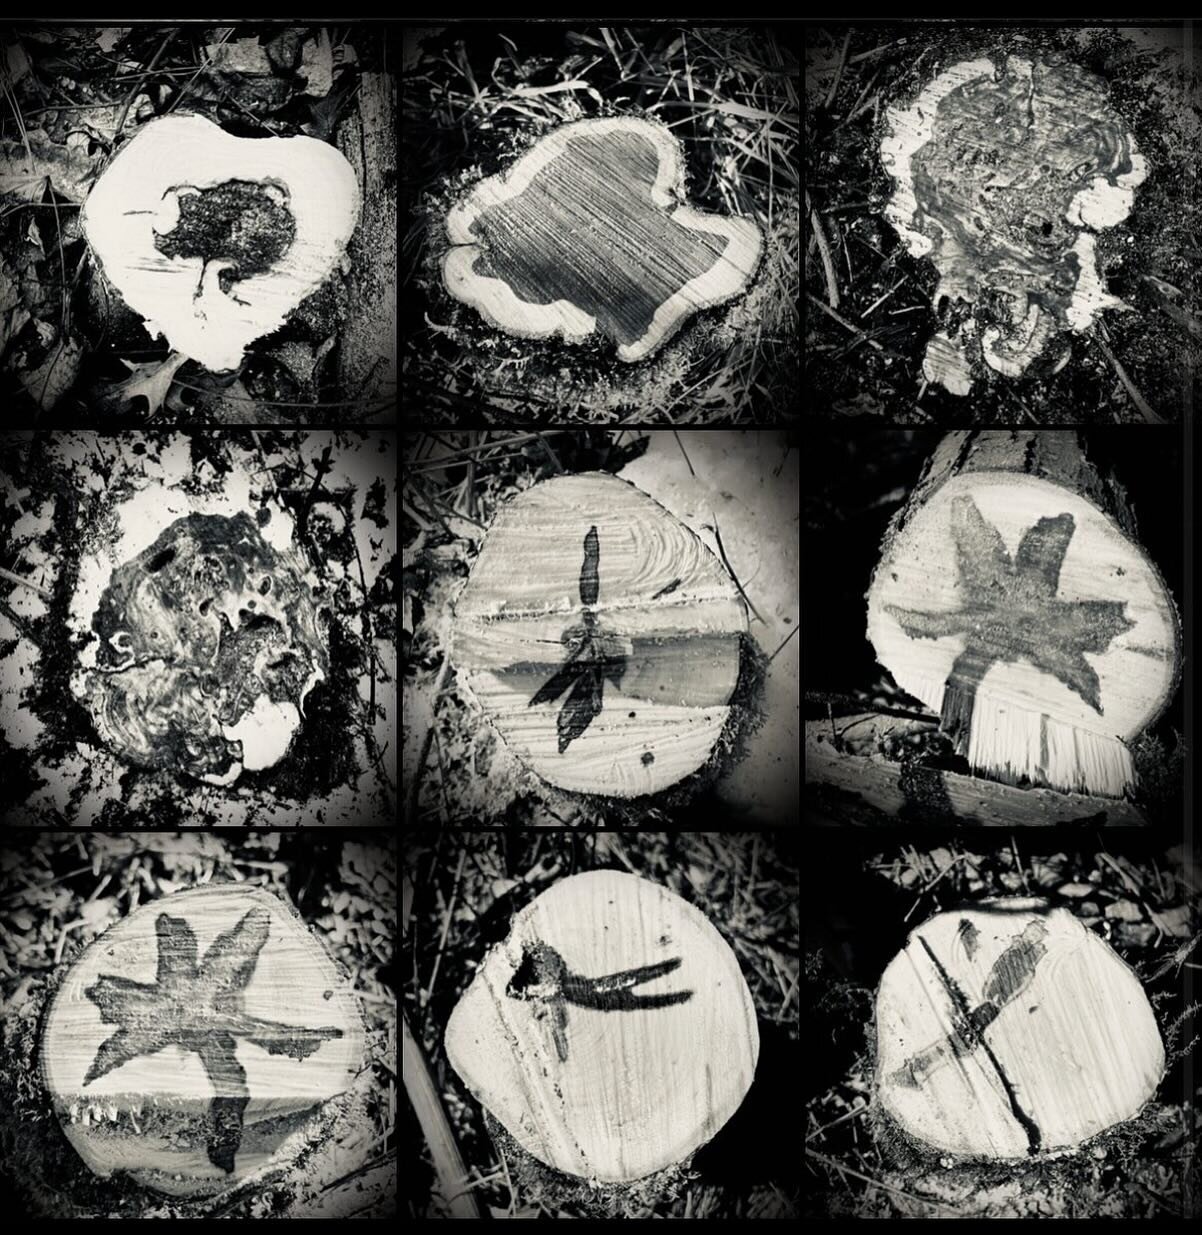 Come enjoy this freakishly beautiful weather with a stroll through the woods with us tonight at 6 for our monthly Social Hike. You can learn about what these weird designs are in these grid pics. Meet at the outdoor tennis courts at the Y.